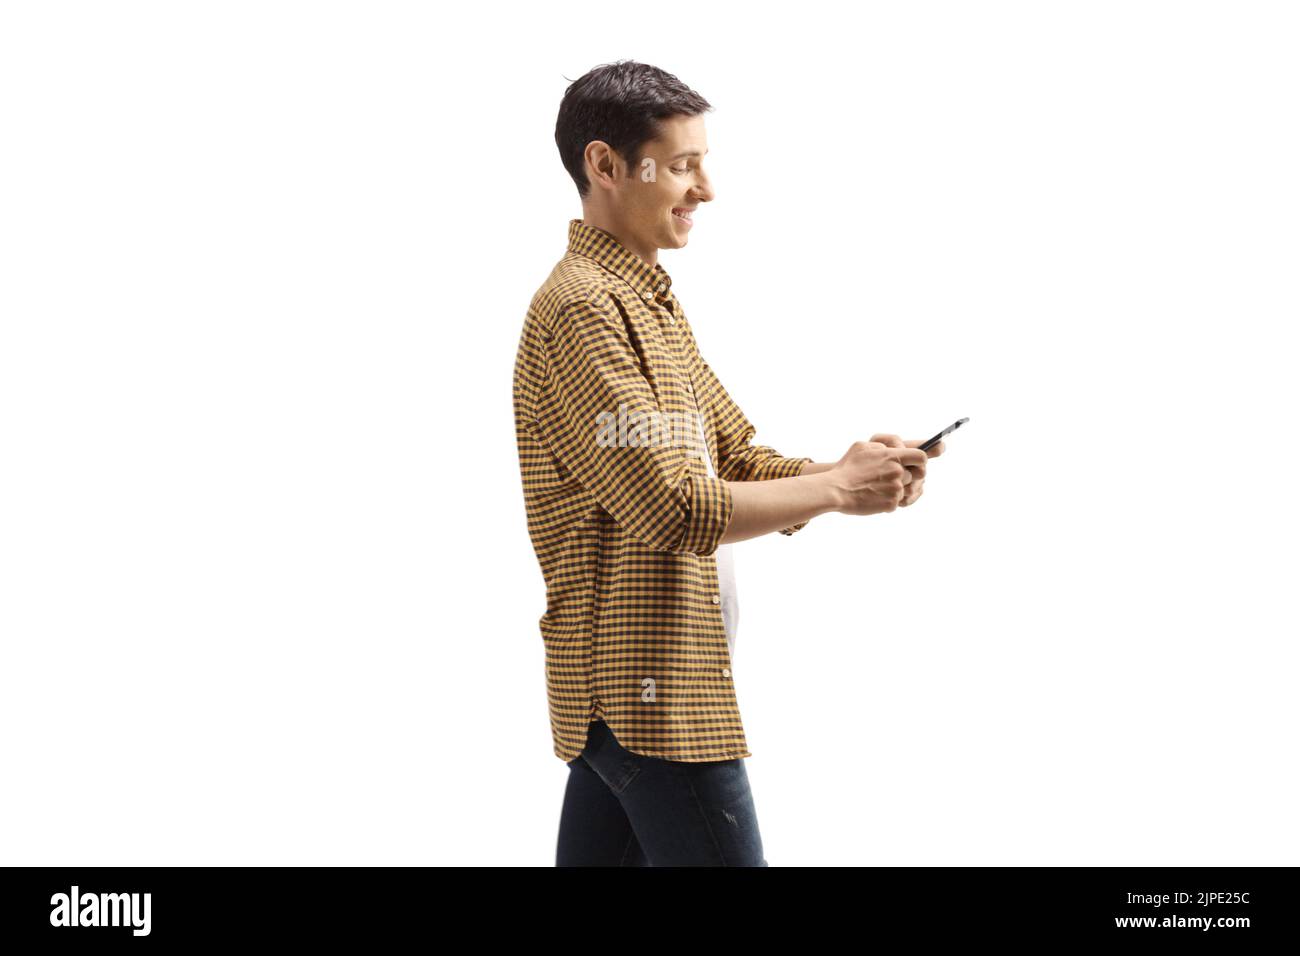 Young man in shirt and jeans using a mobile phone isolated on white background Stock Photo